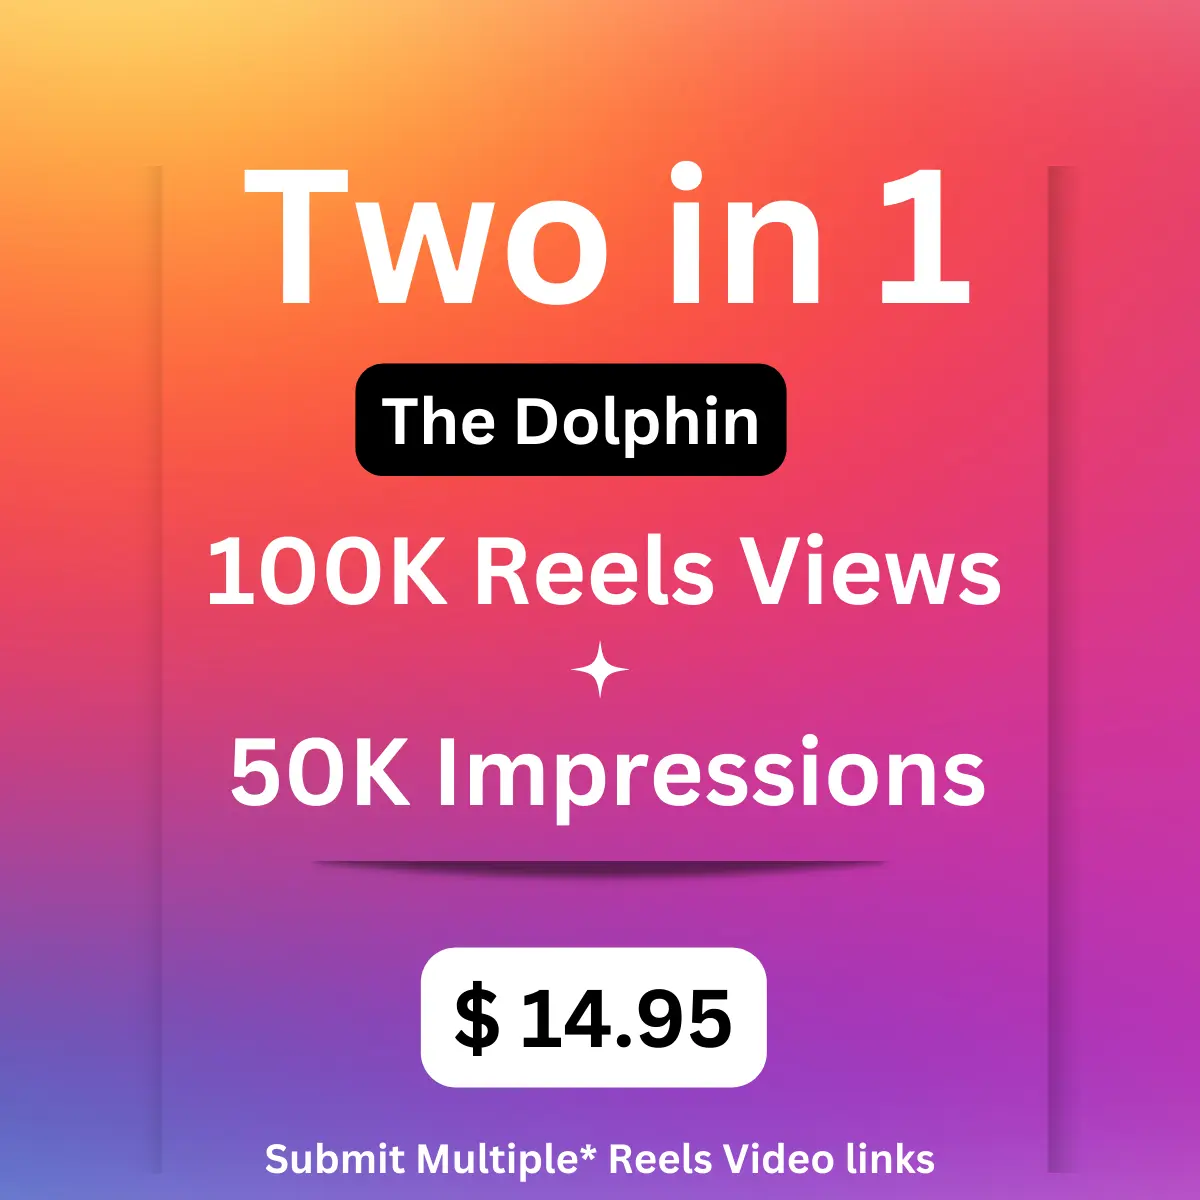 Two in 1 - The Dolphin